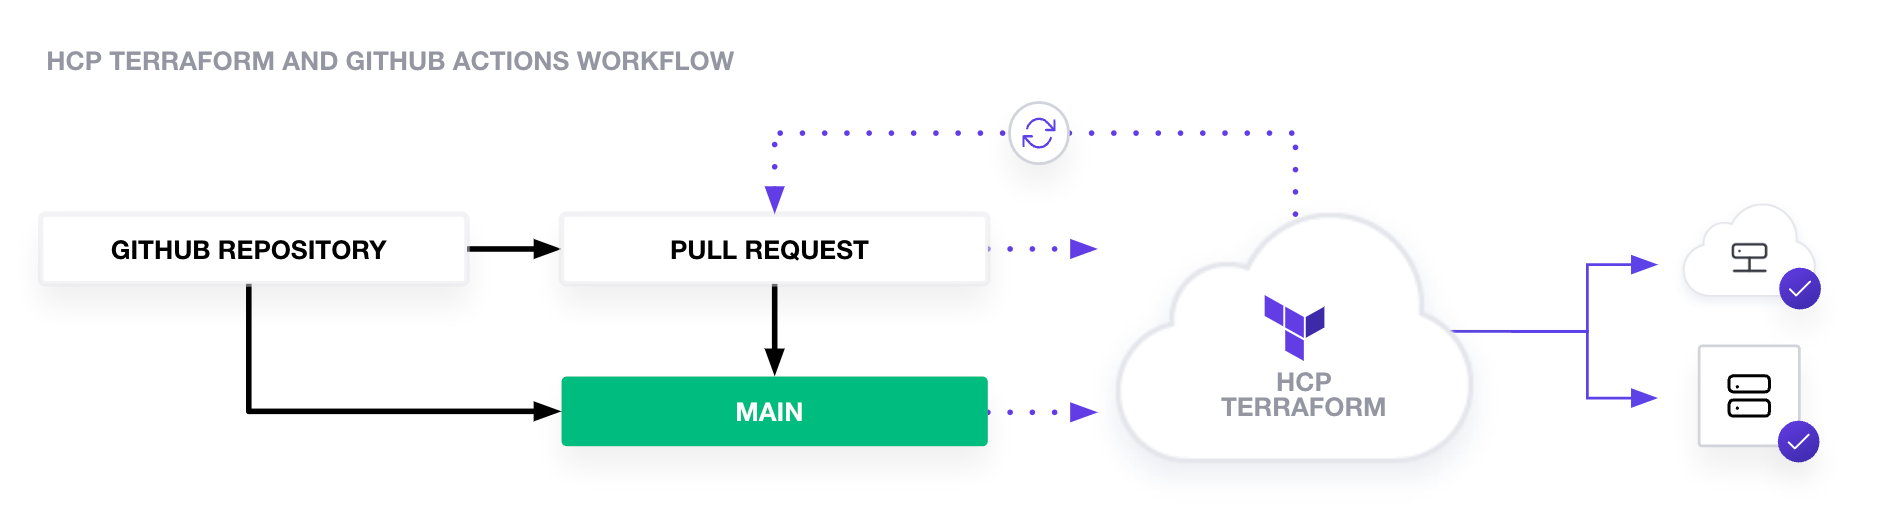 Terraform Cloud and GitHub Actions Workflow